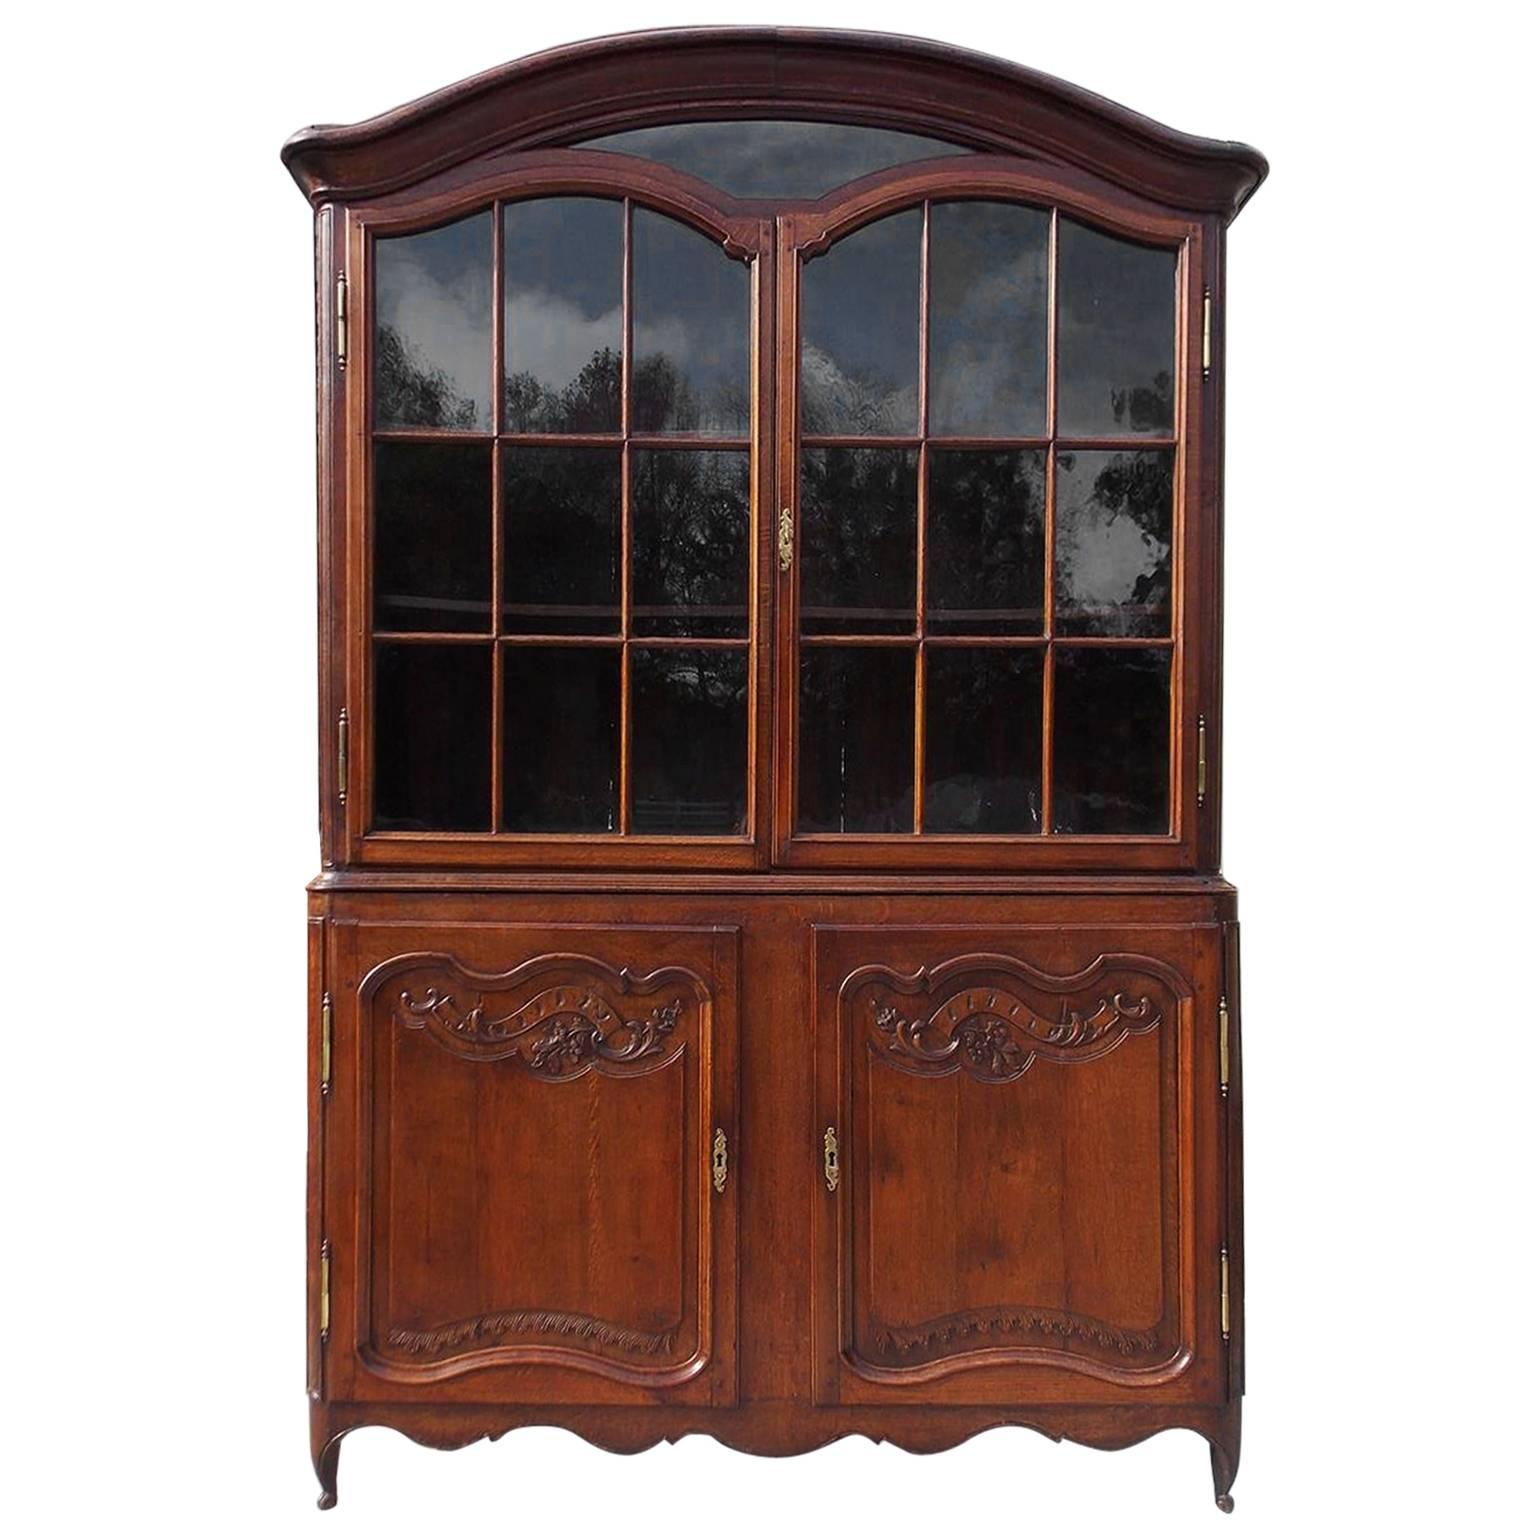 French Provincial Walnut Flanking Glass & Cabinet Arched Dome Cupboard, C. 1780 For Sale